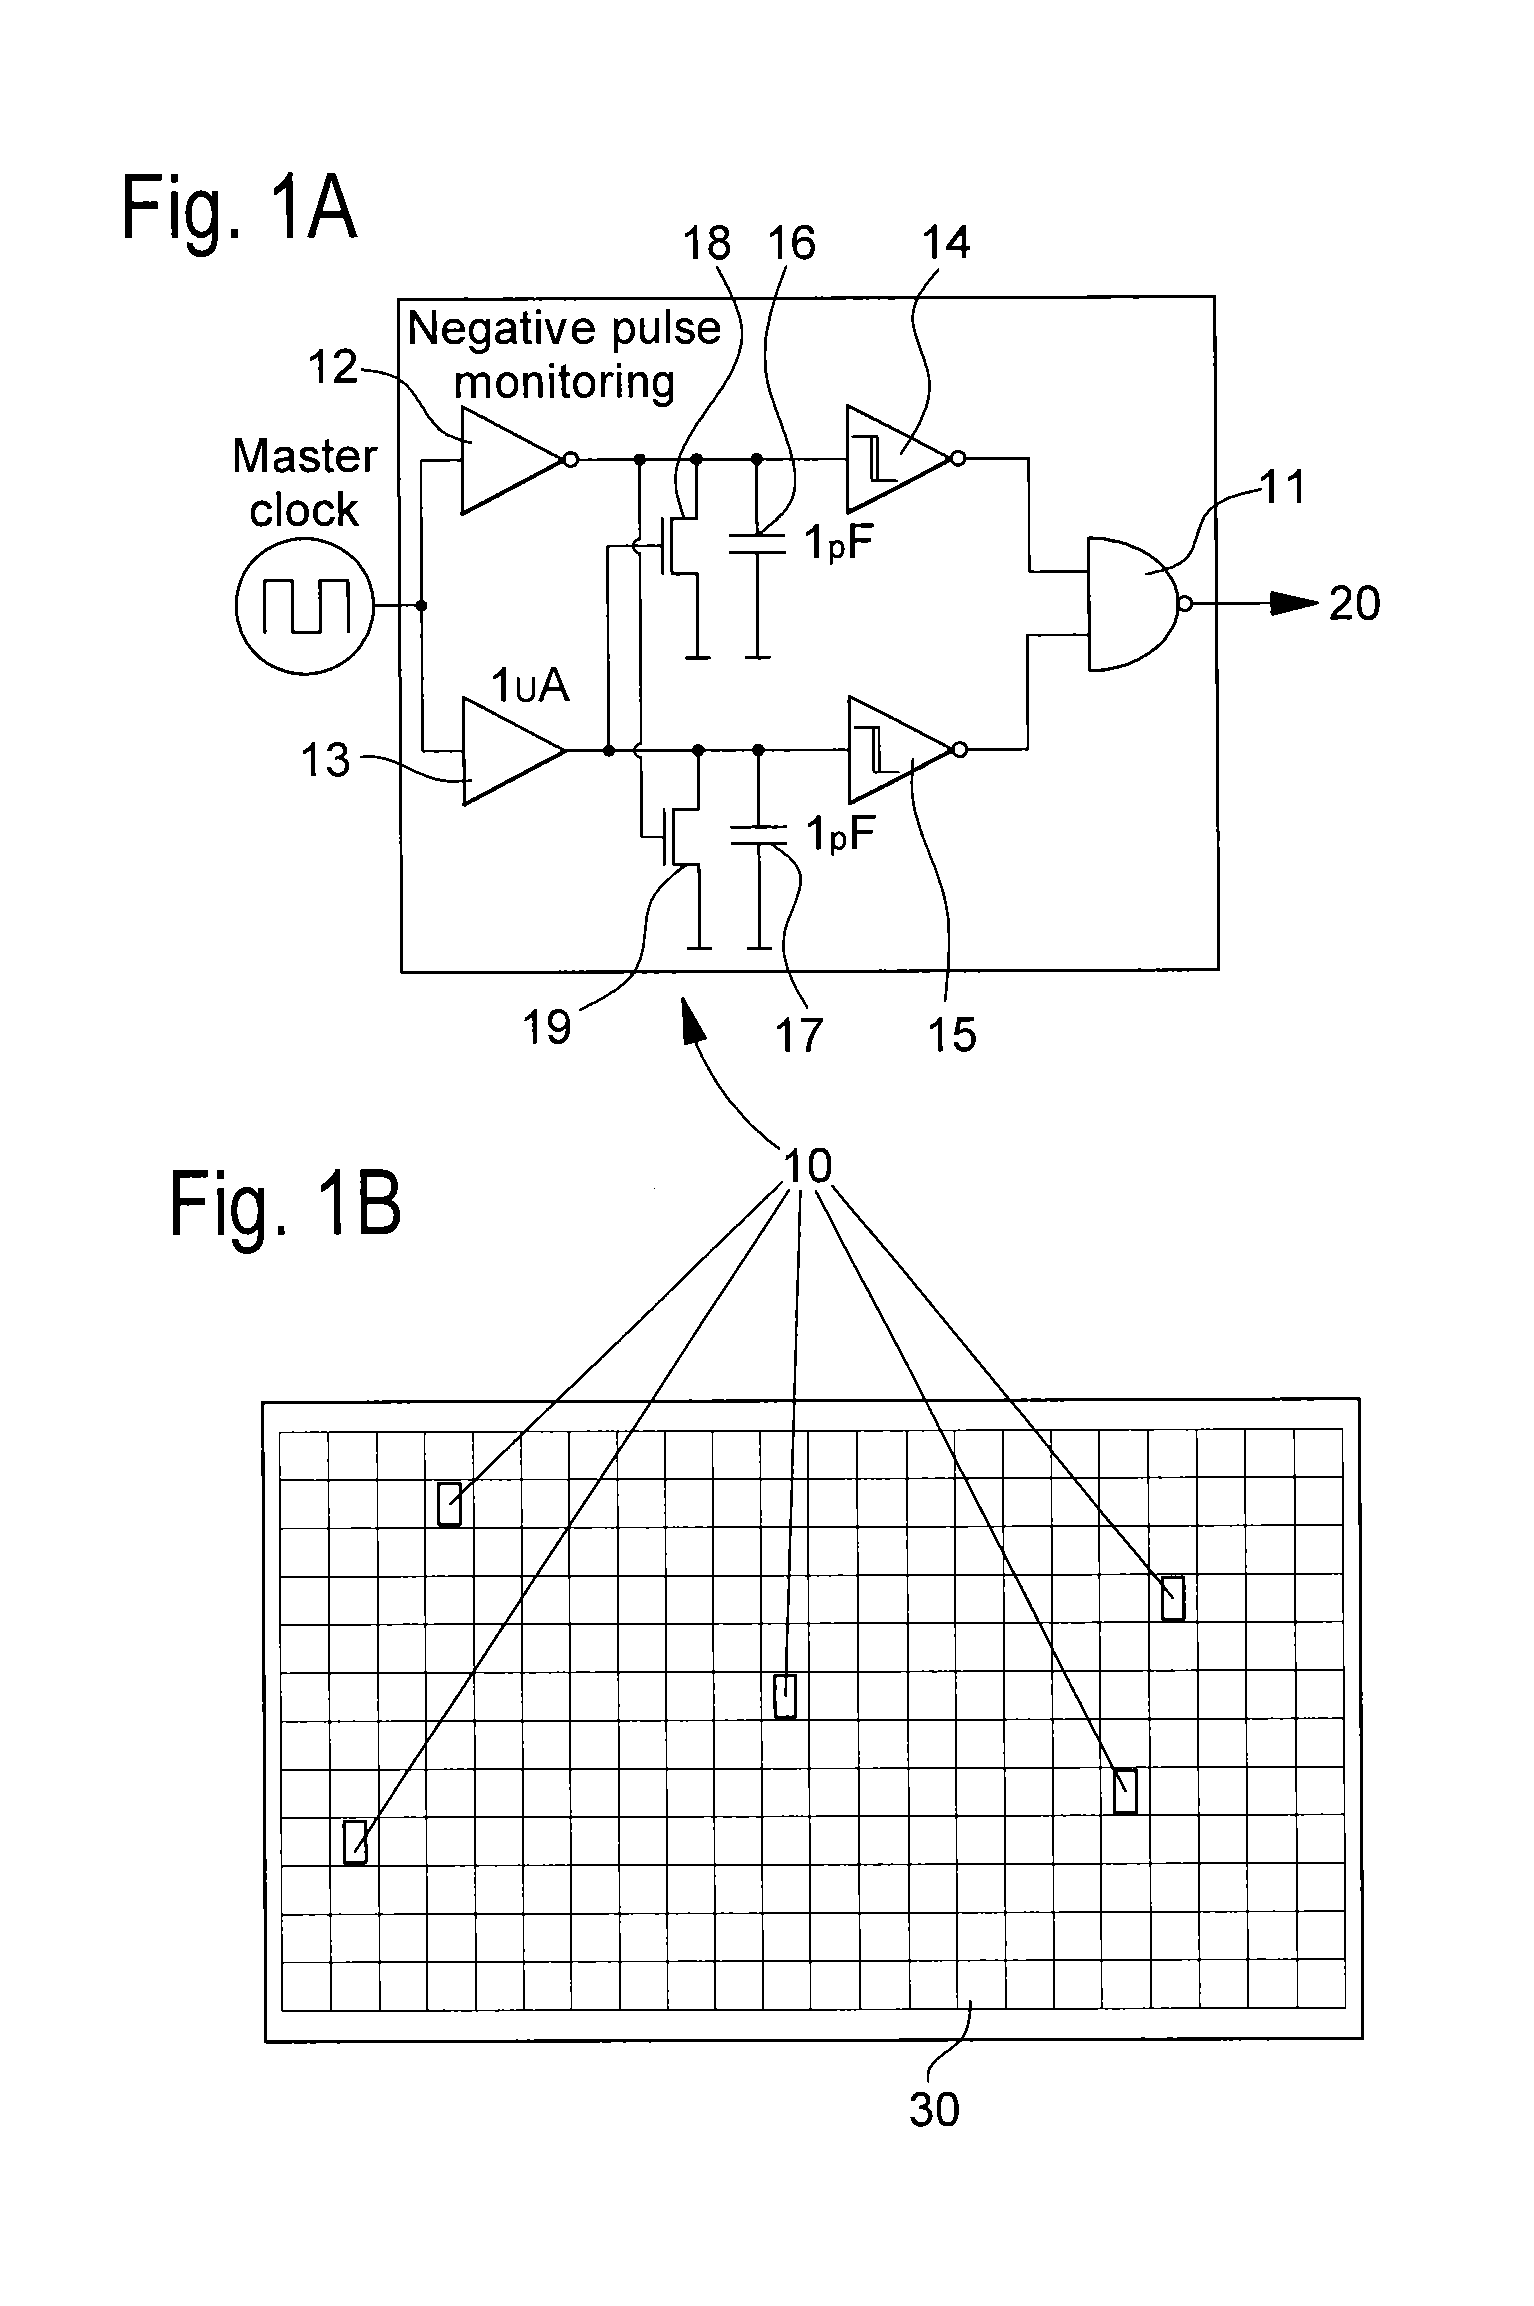 Integrated circuit with distributed clock tampering detectors